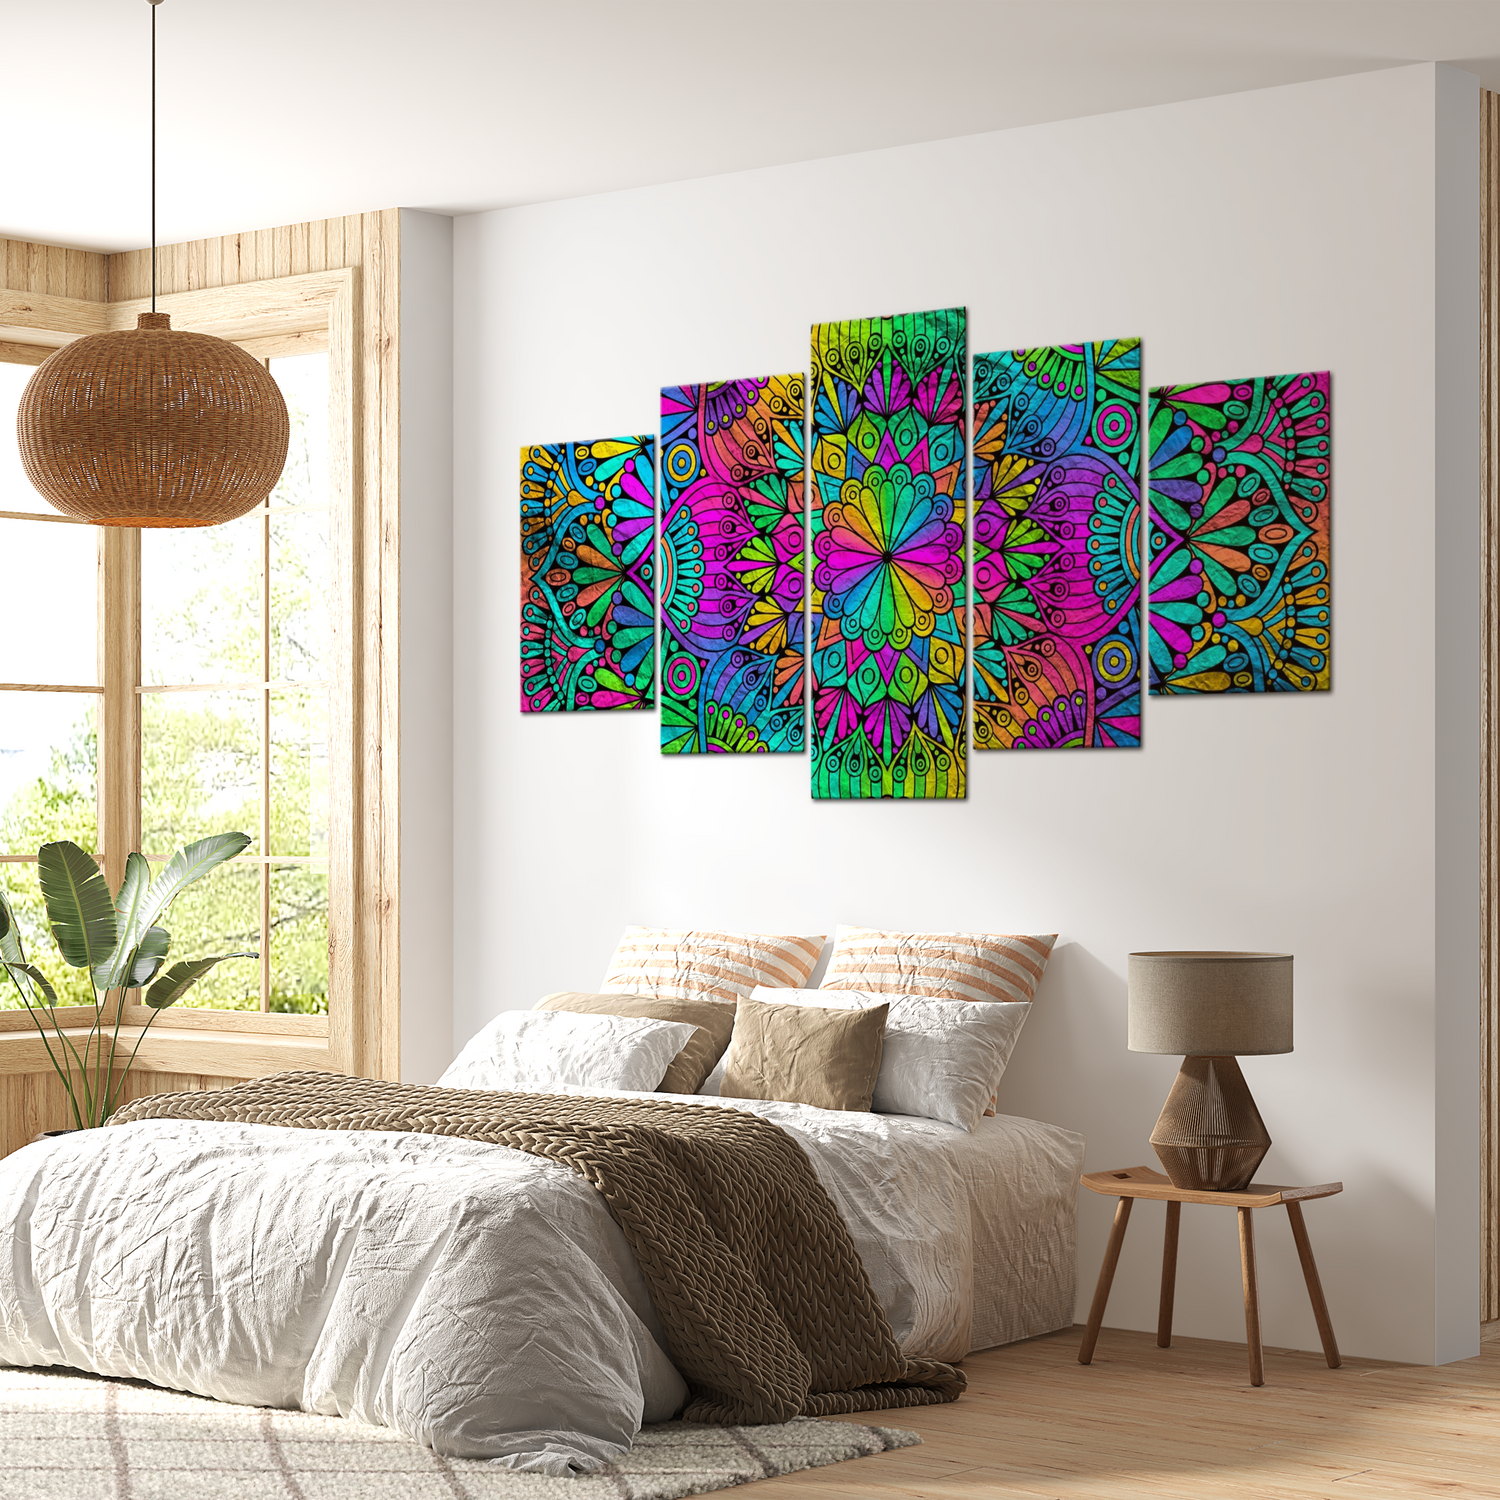 Stretched Canvas Zen Art - Mandala Peacock Feathers 40"Wx20"H